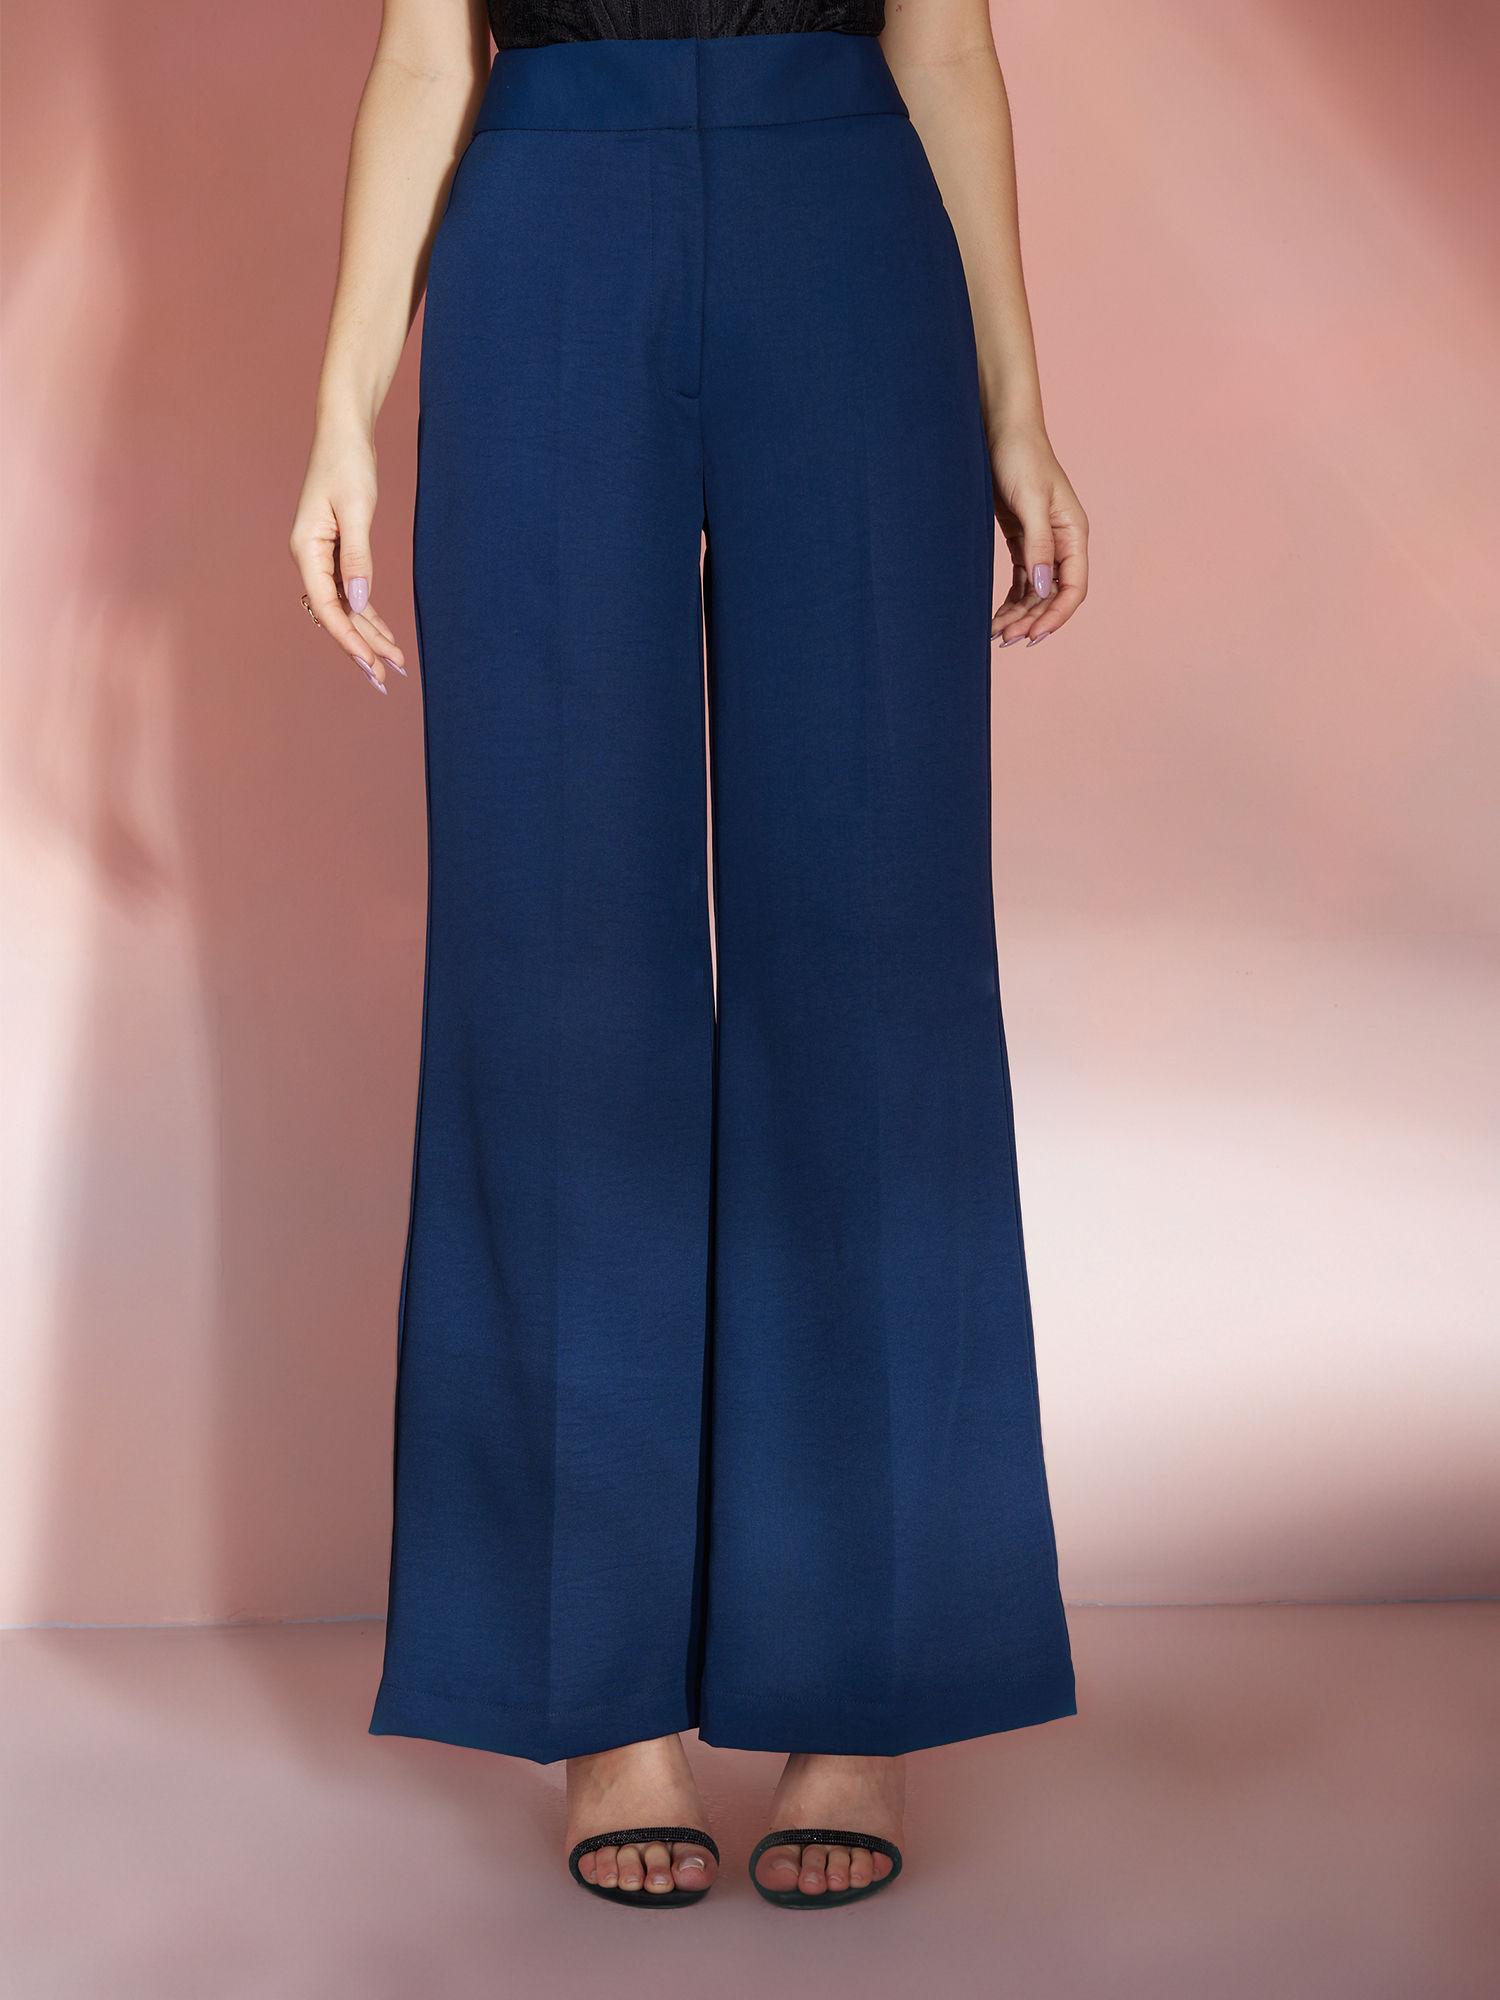 teal solid high waist wide leg trousers